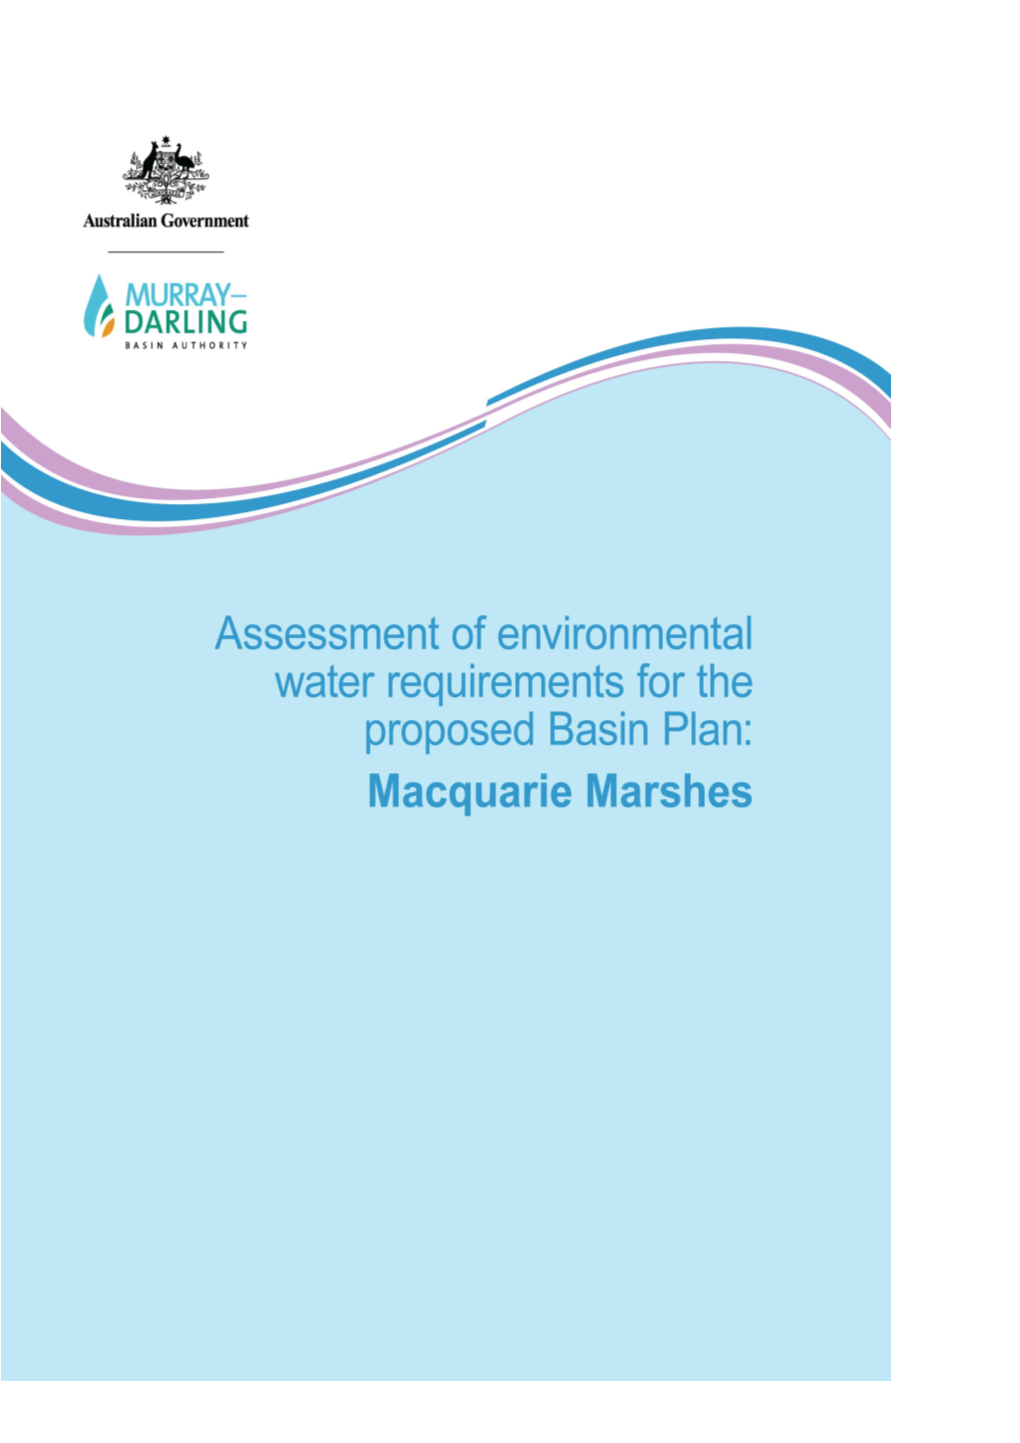 Assessment of Environmental Water Requirements for the Proposed Basin Plan:Macquarie Marshes